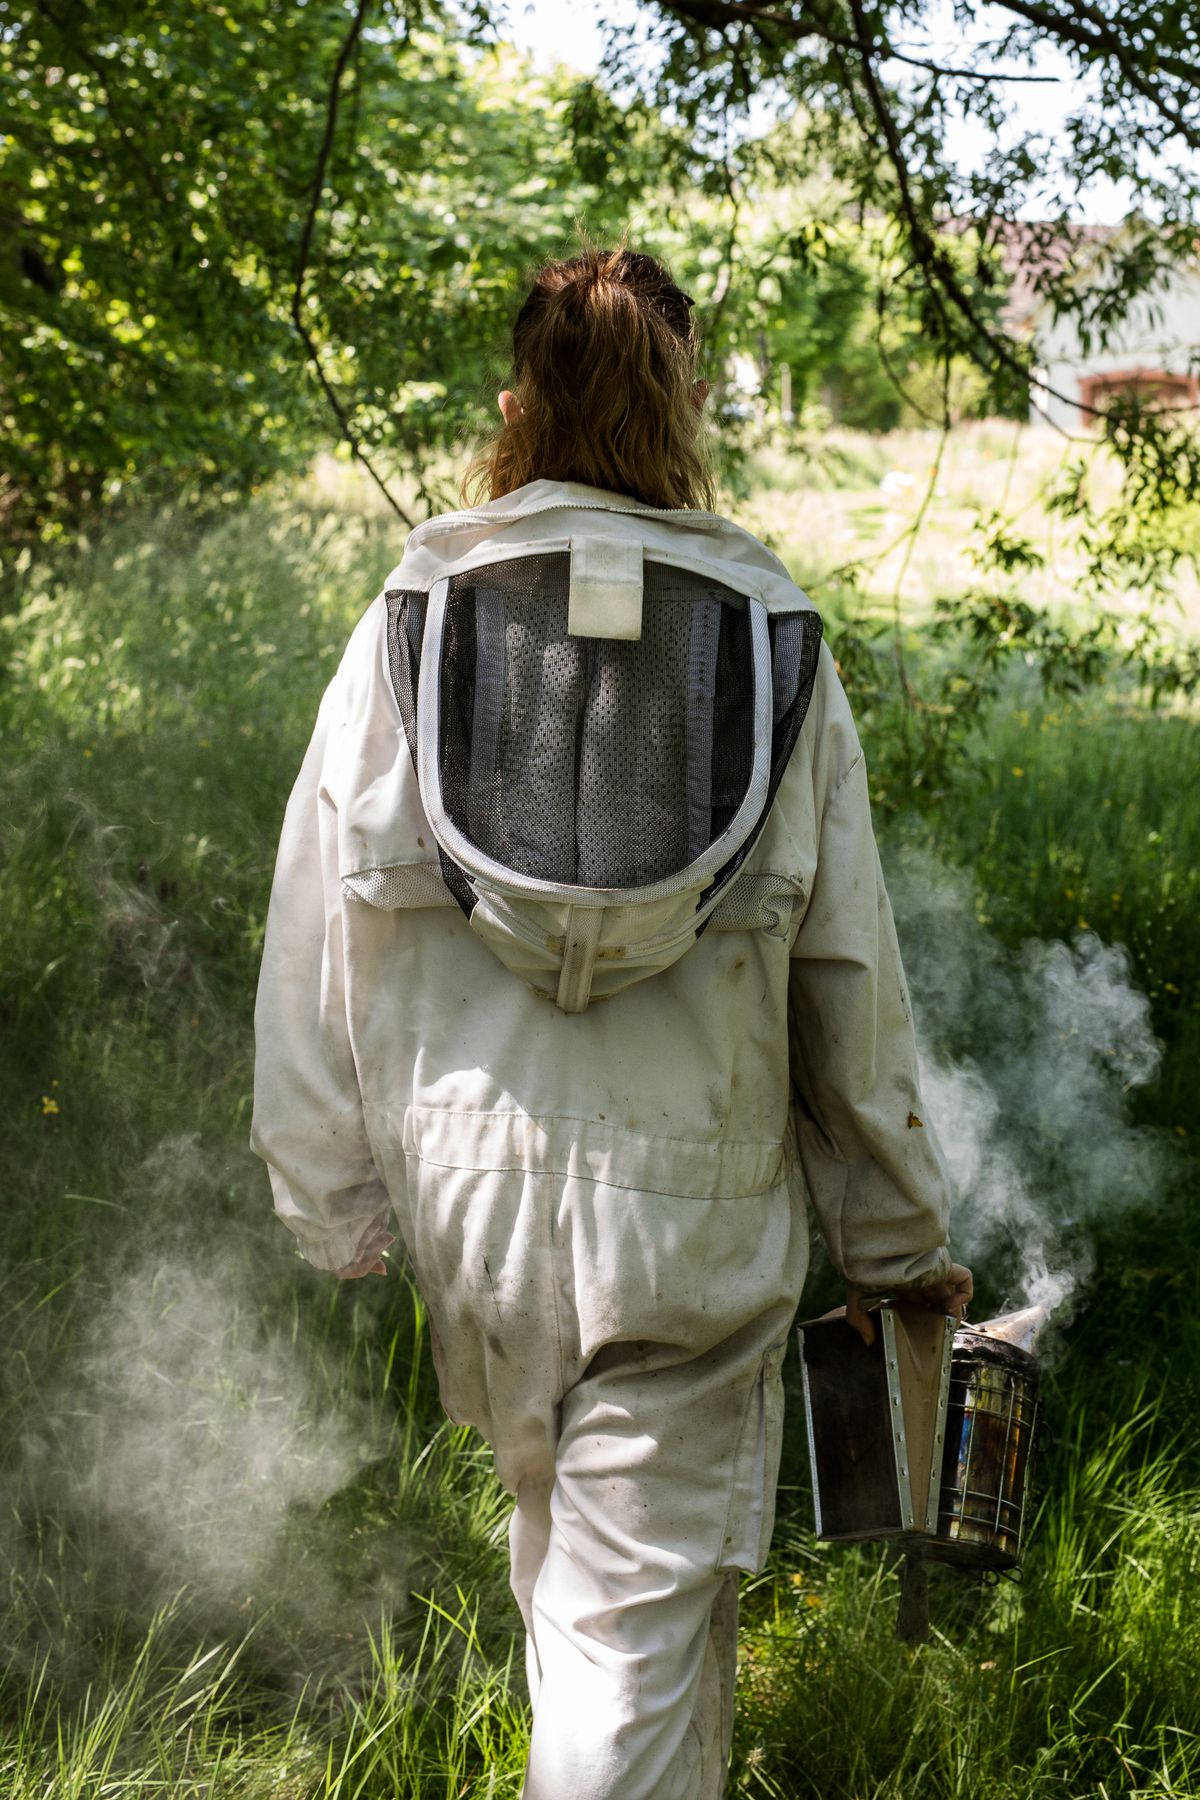 A person walks away from the camera in a bee keeping suit.